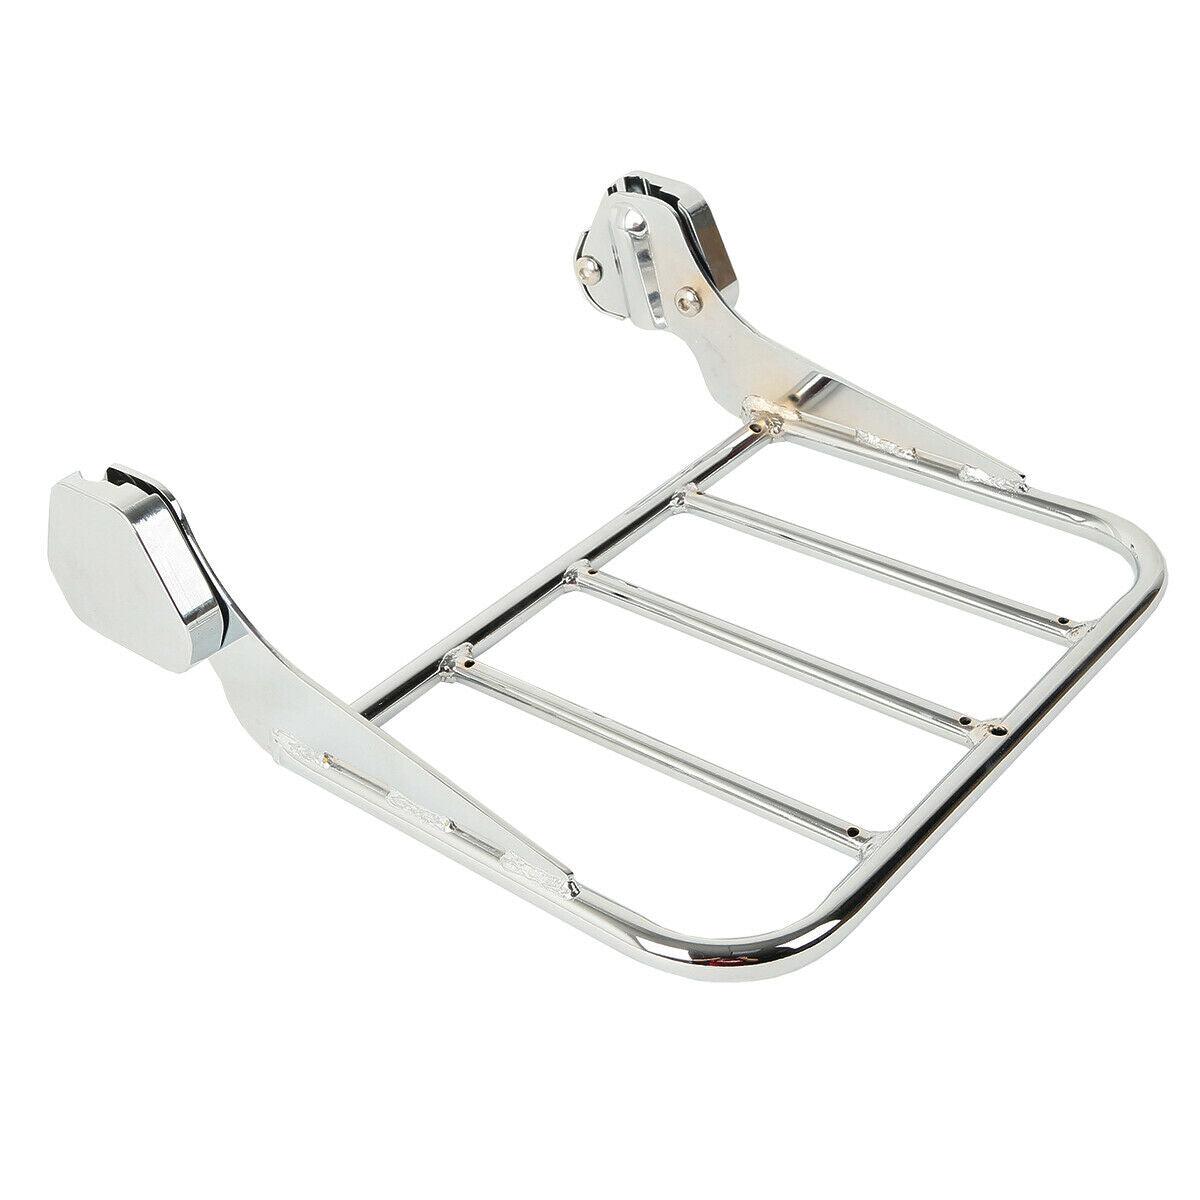 Luggage Rack Fit For Harley Touring Road King Street Glide 1997-2008 2007 2006 - Moto Life Products